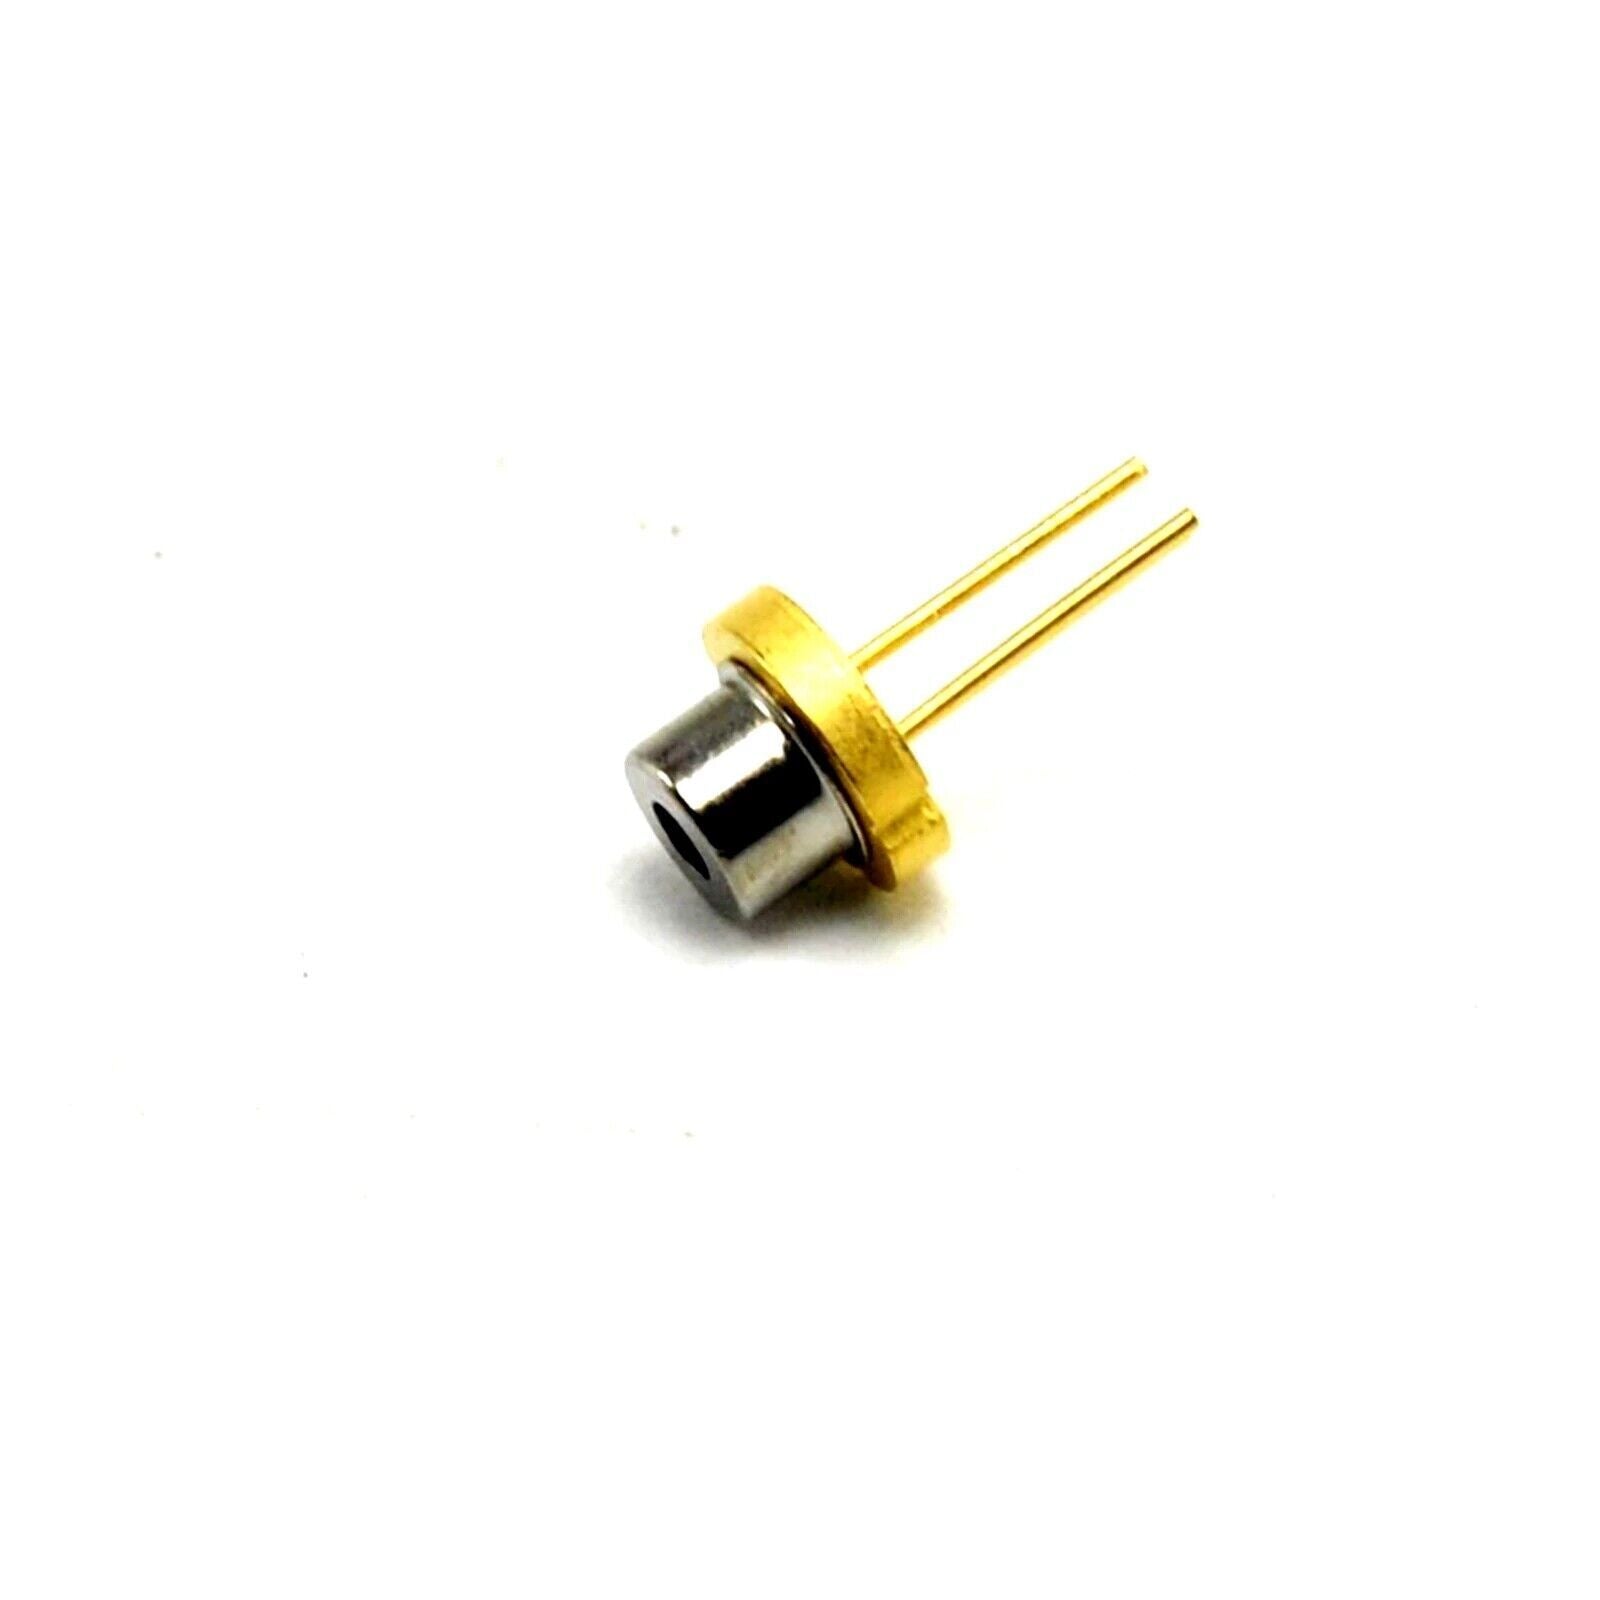 Sony SLD1254JFR-V 640nm 90mW TO38 Red Laser Diode